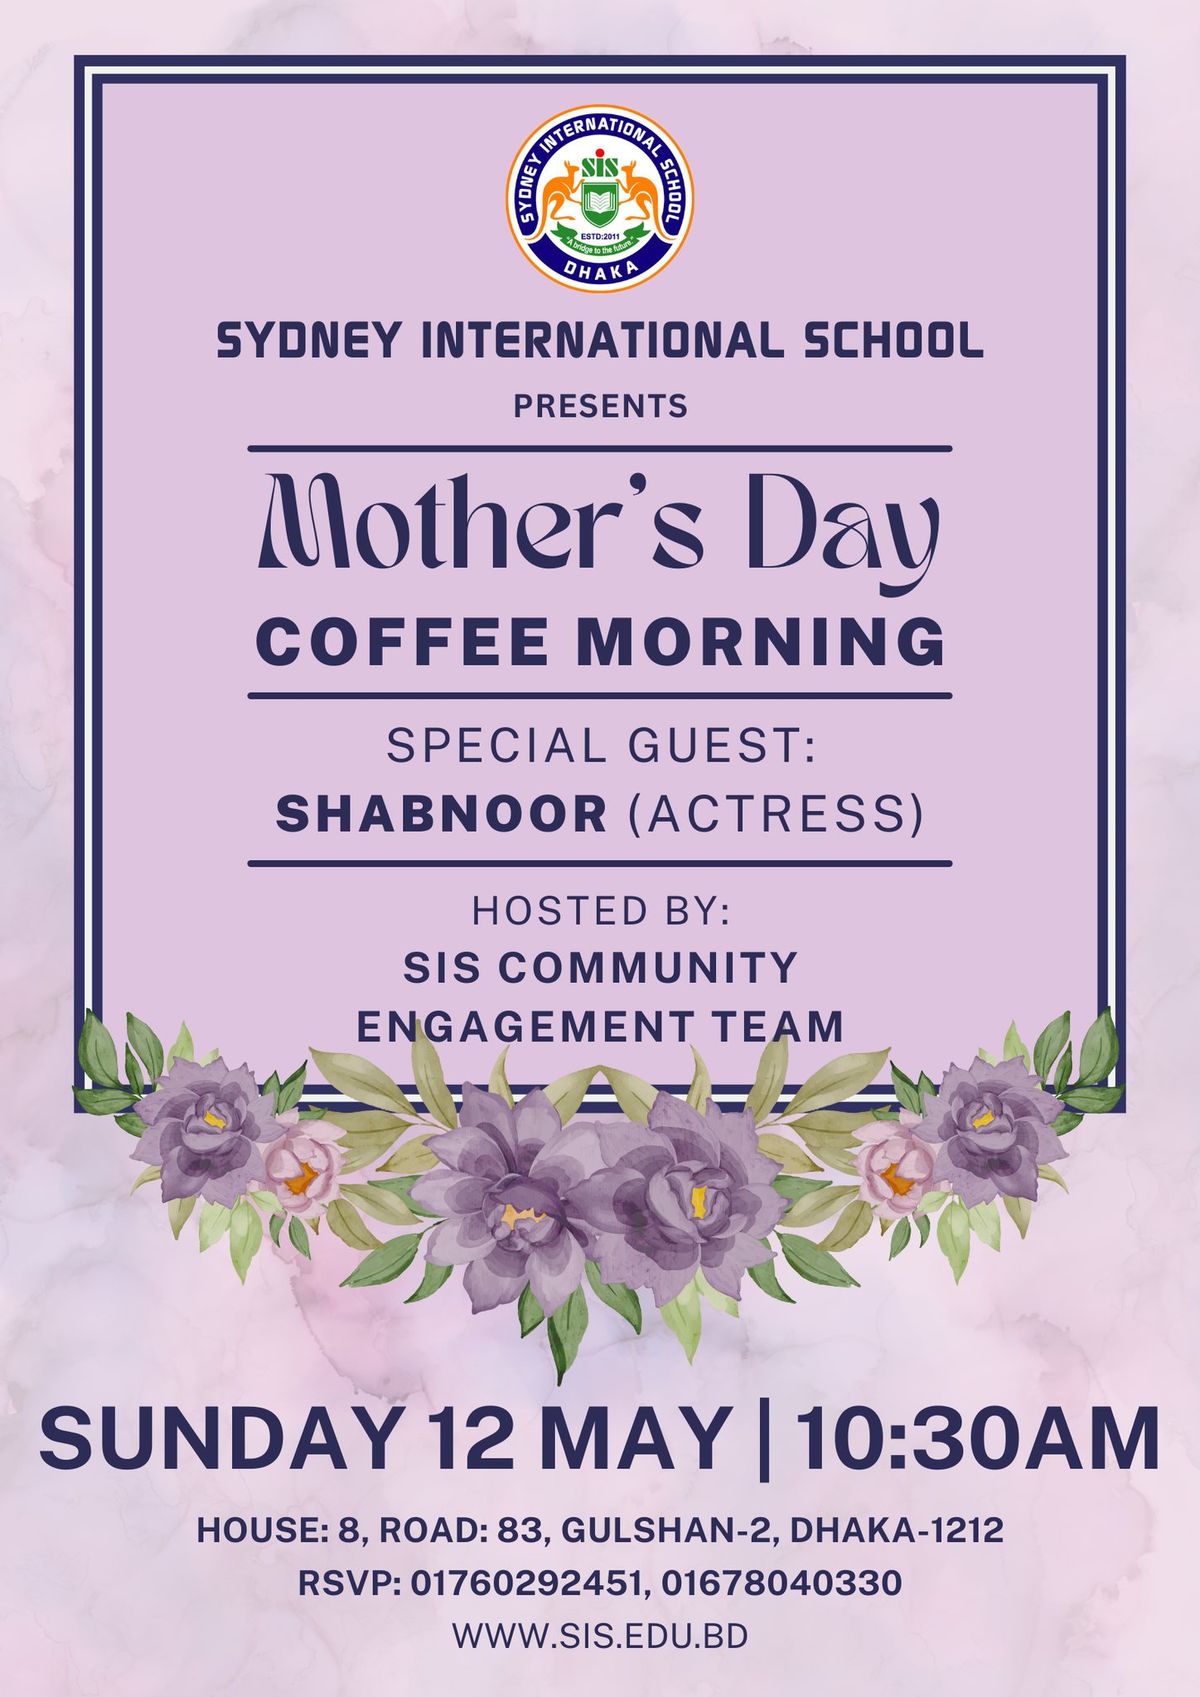 Mother's Day COFFEE MORNING